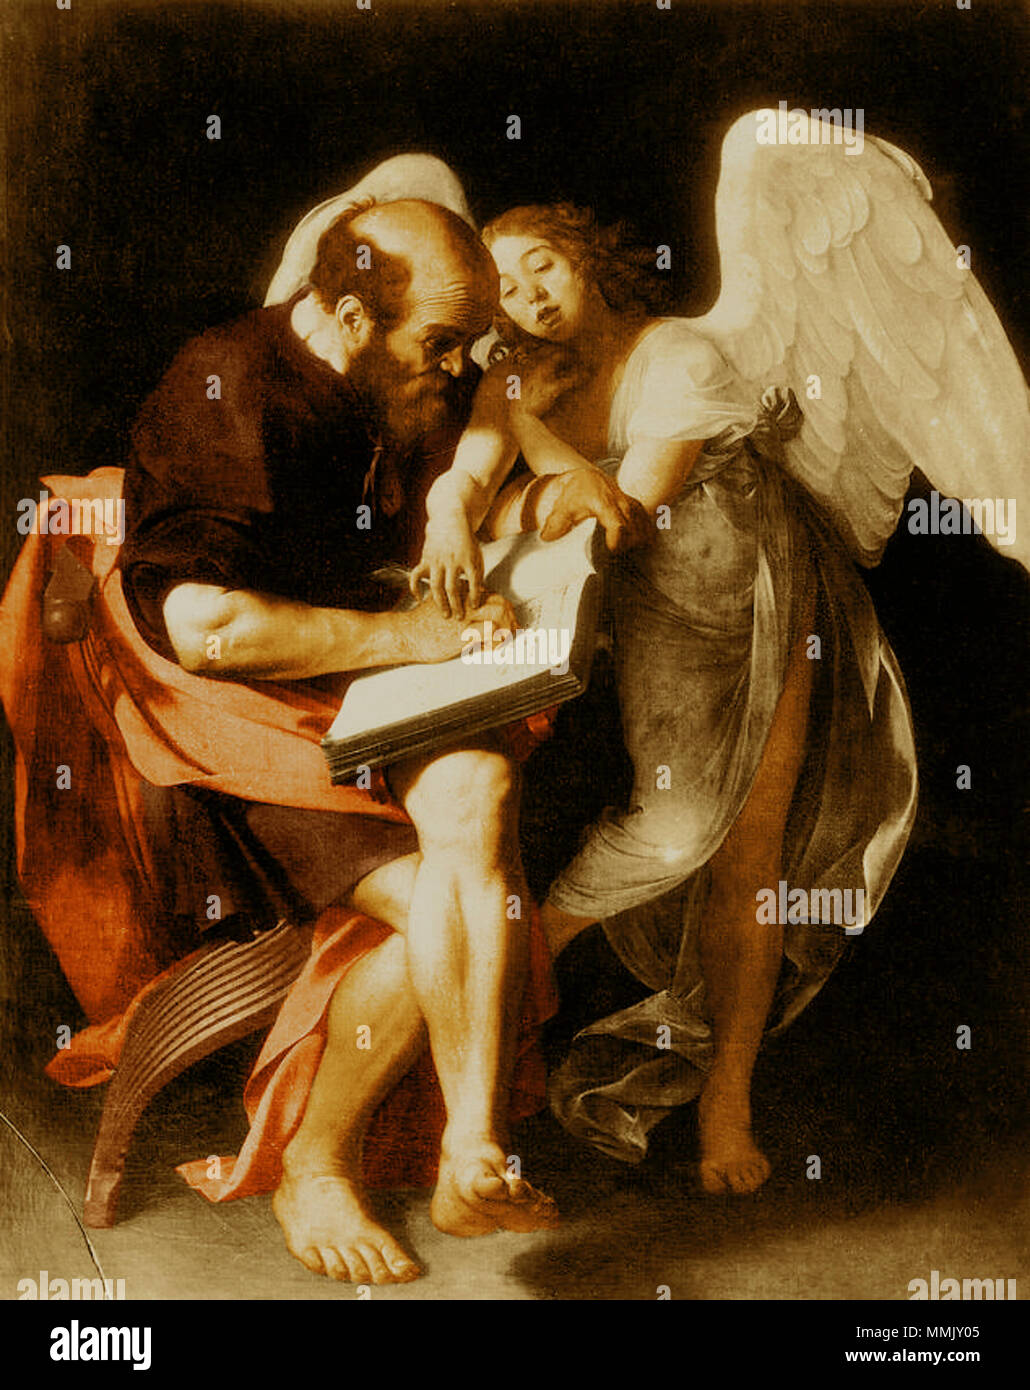 .  English: A self-produced, colourised version of this destroyed, no longer existing work, as only black and white photographs previously existed as reference.  Deutsch: Der Evangelist Matthäus mit dem Engel English: Saint Matthew and the Angel . 1602. Caravaggio MatthewAndTheAngel byMikeyAngels Stock Photo